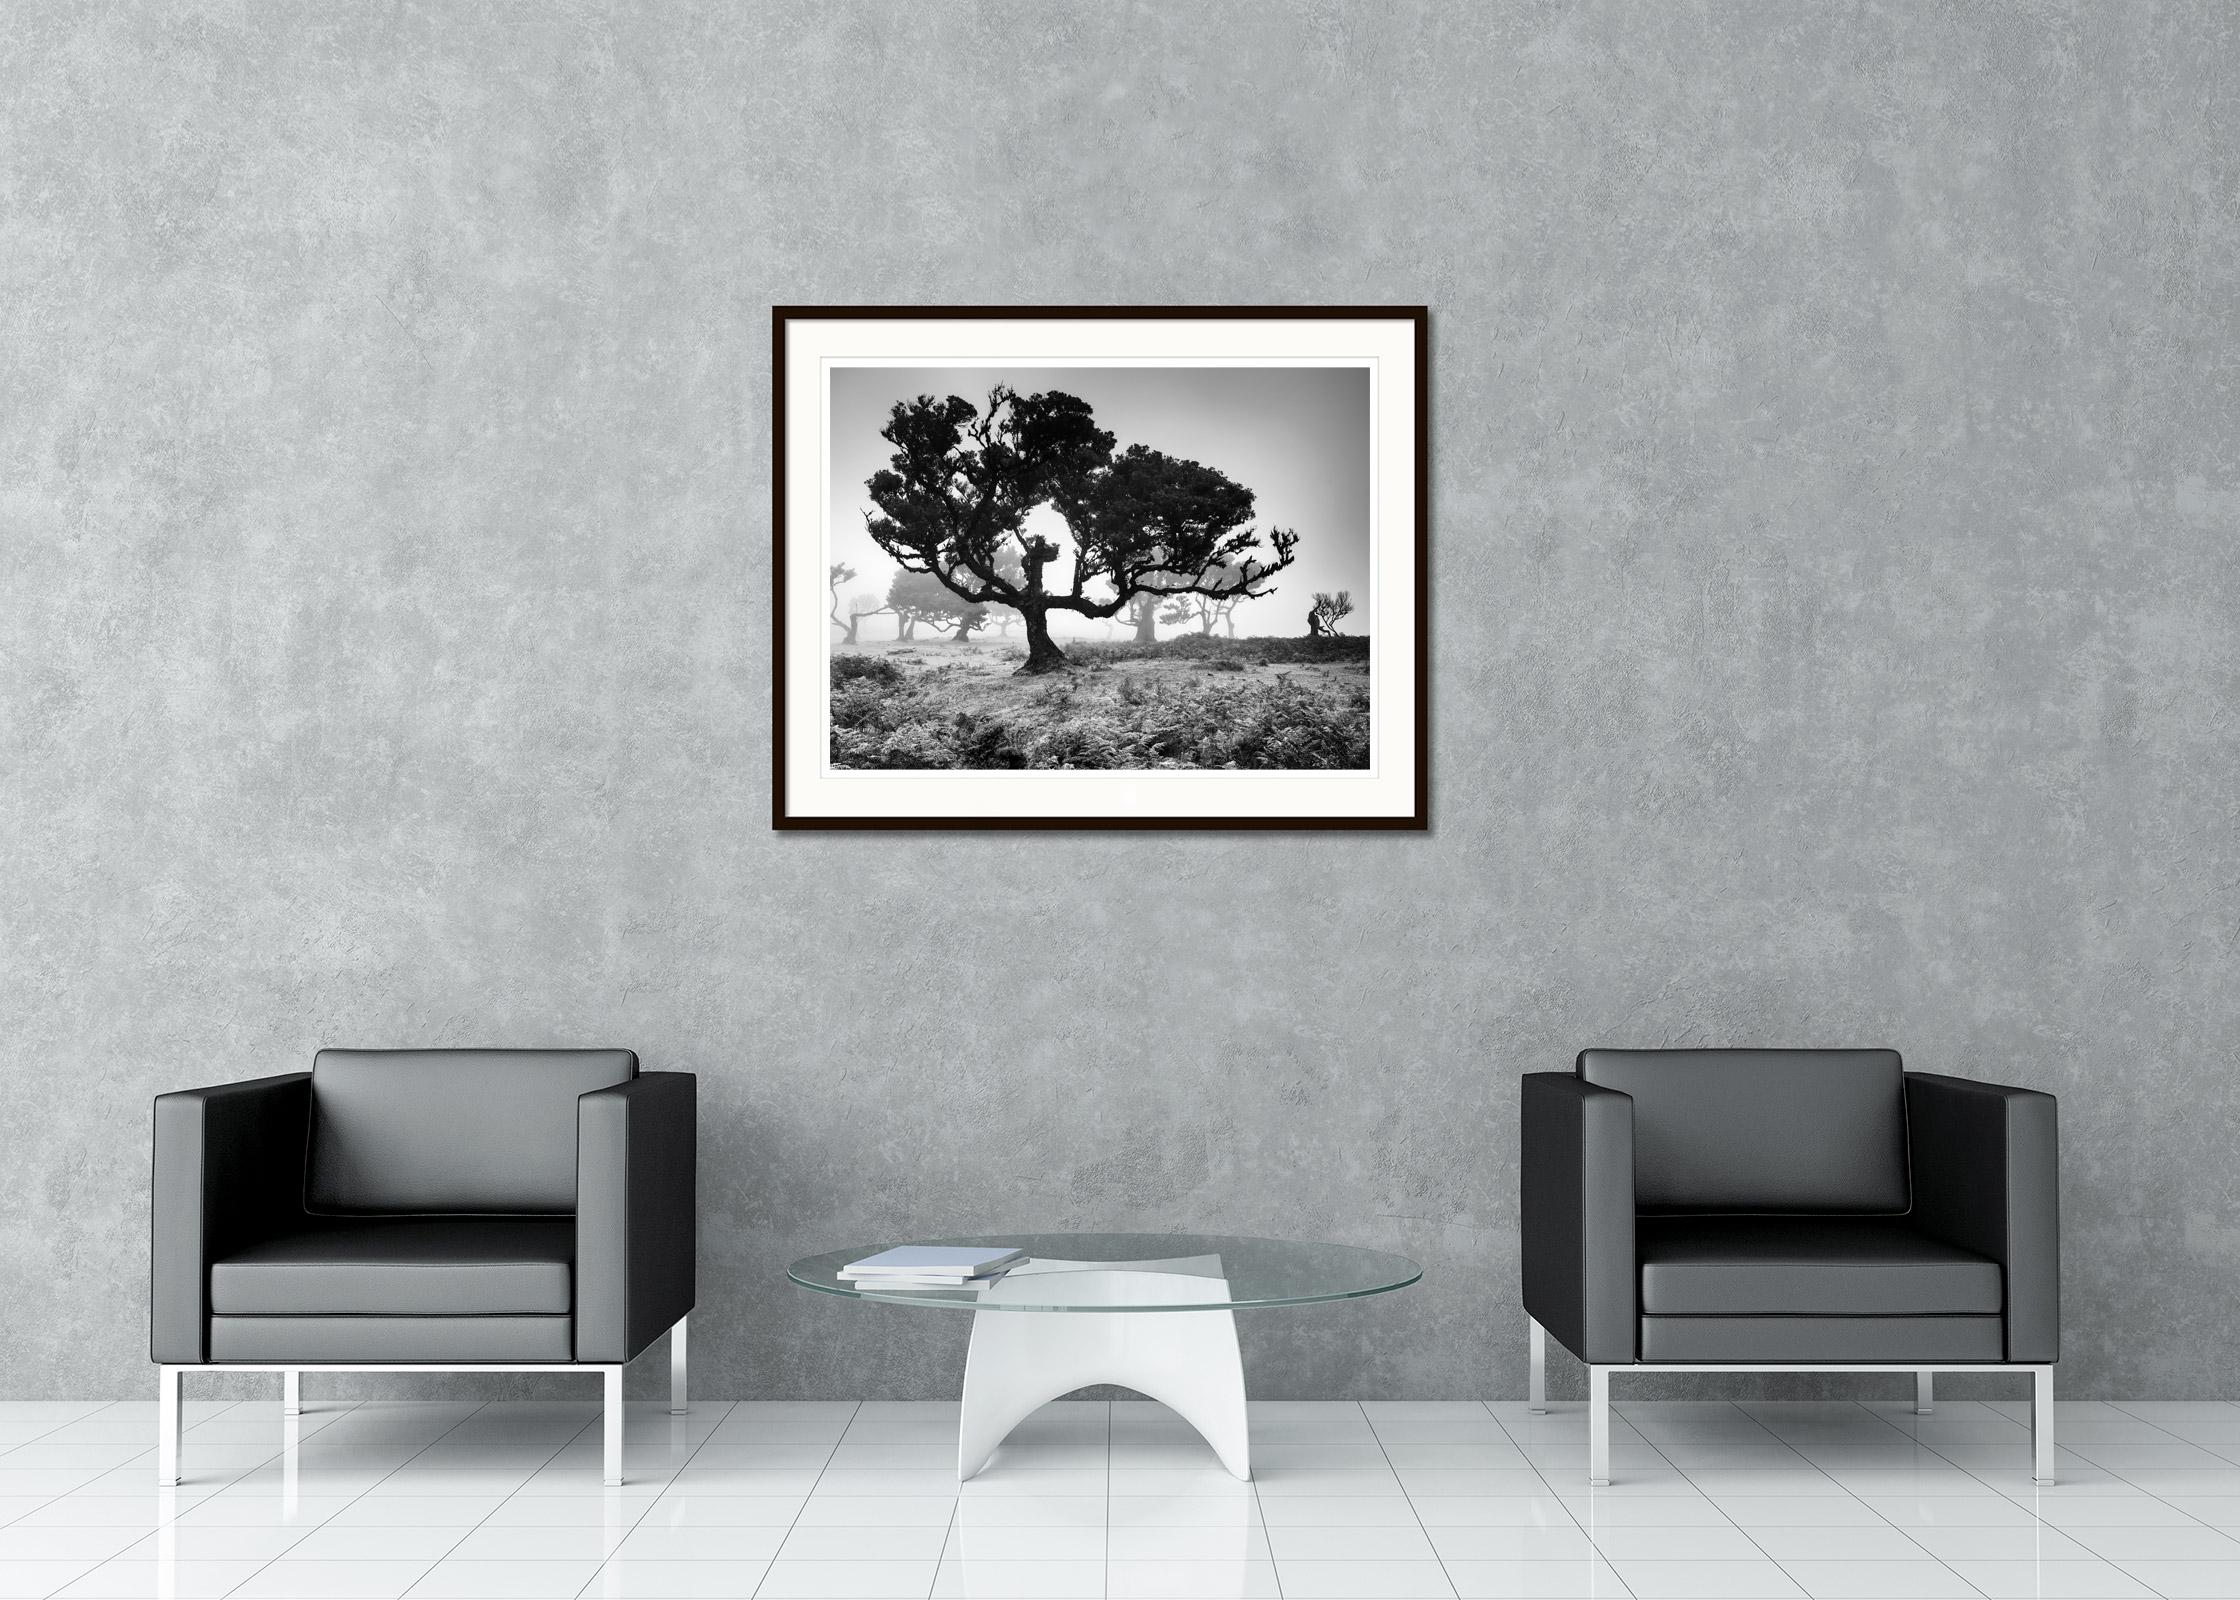 Black and white fine art landscape photography print. Old trees in the fairy forest on the mystical island of Madeira, Fanal, Portugal. Archival pigment ink print, edition of 8. Signed, titled, dated and numbered by artist. Certificate of